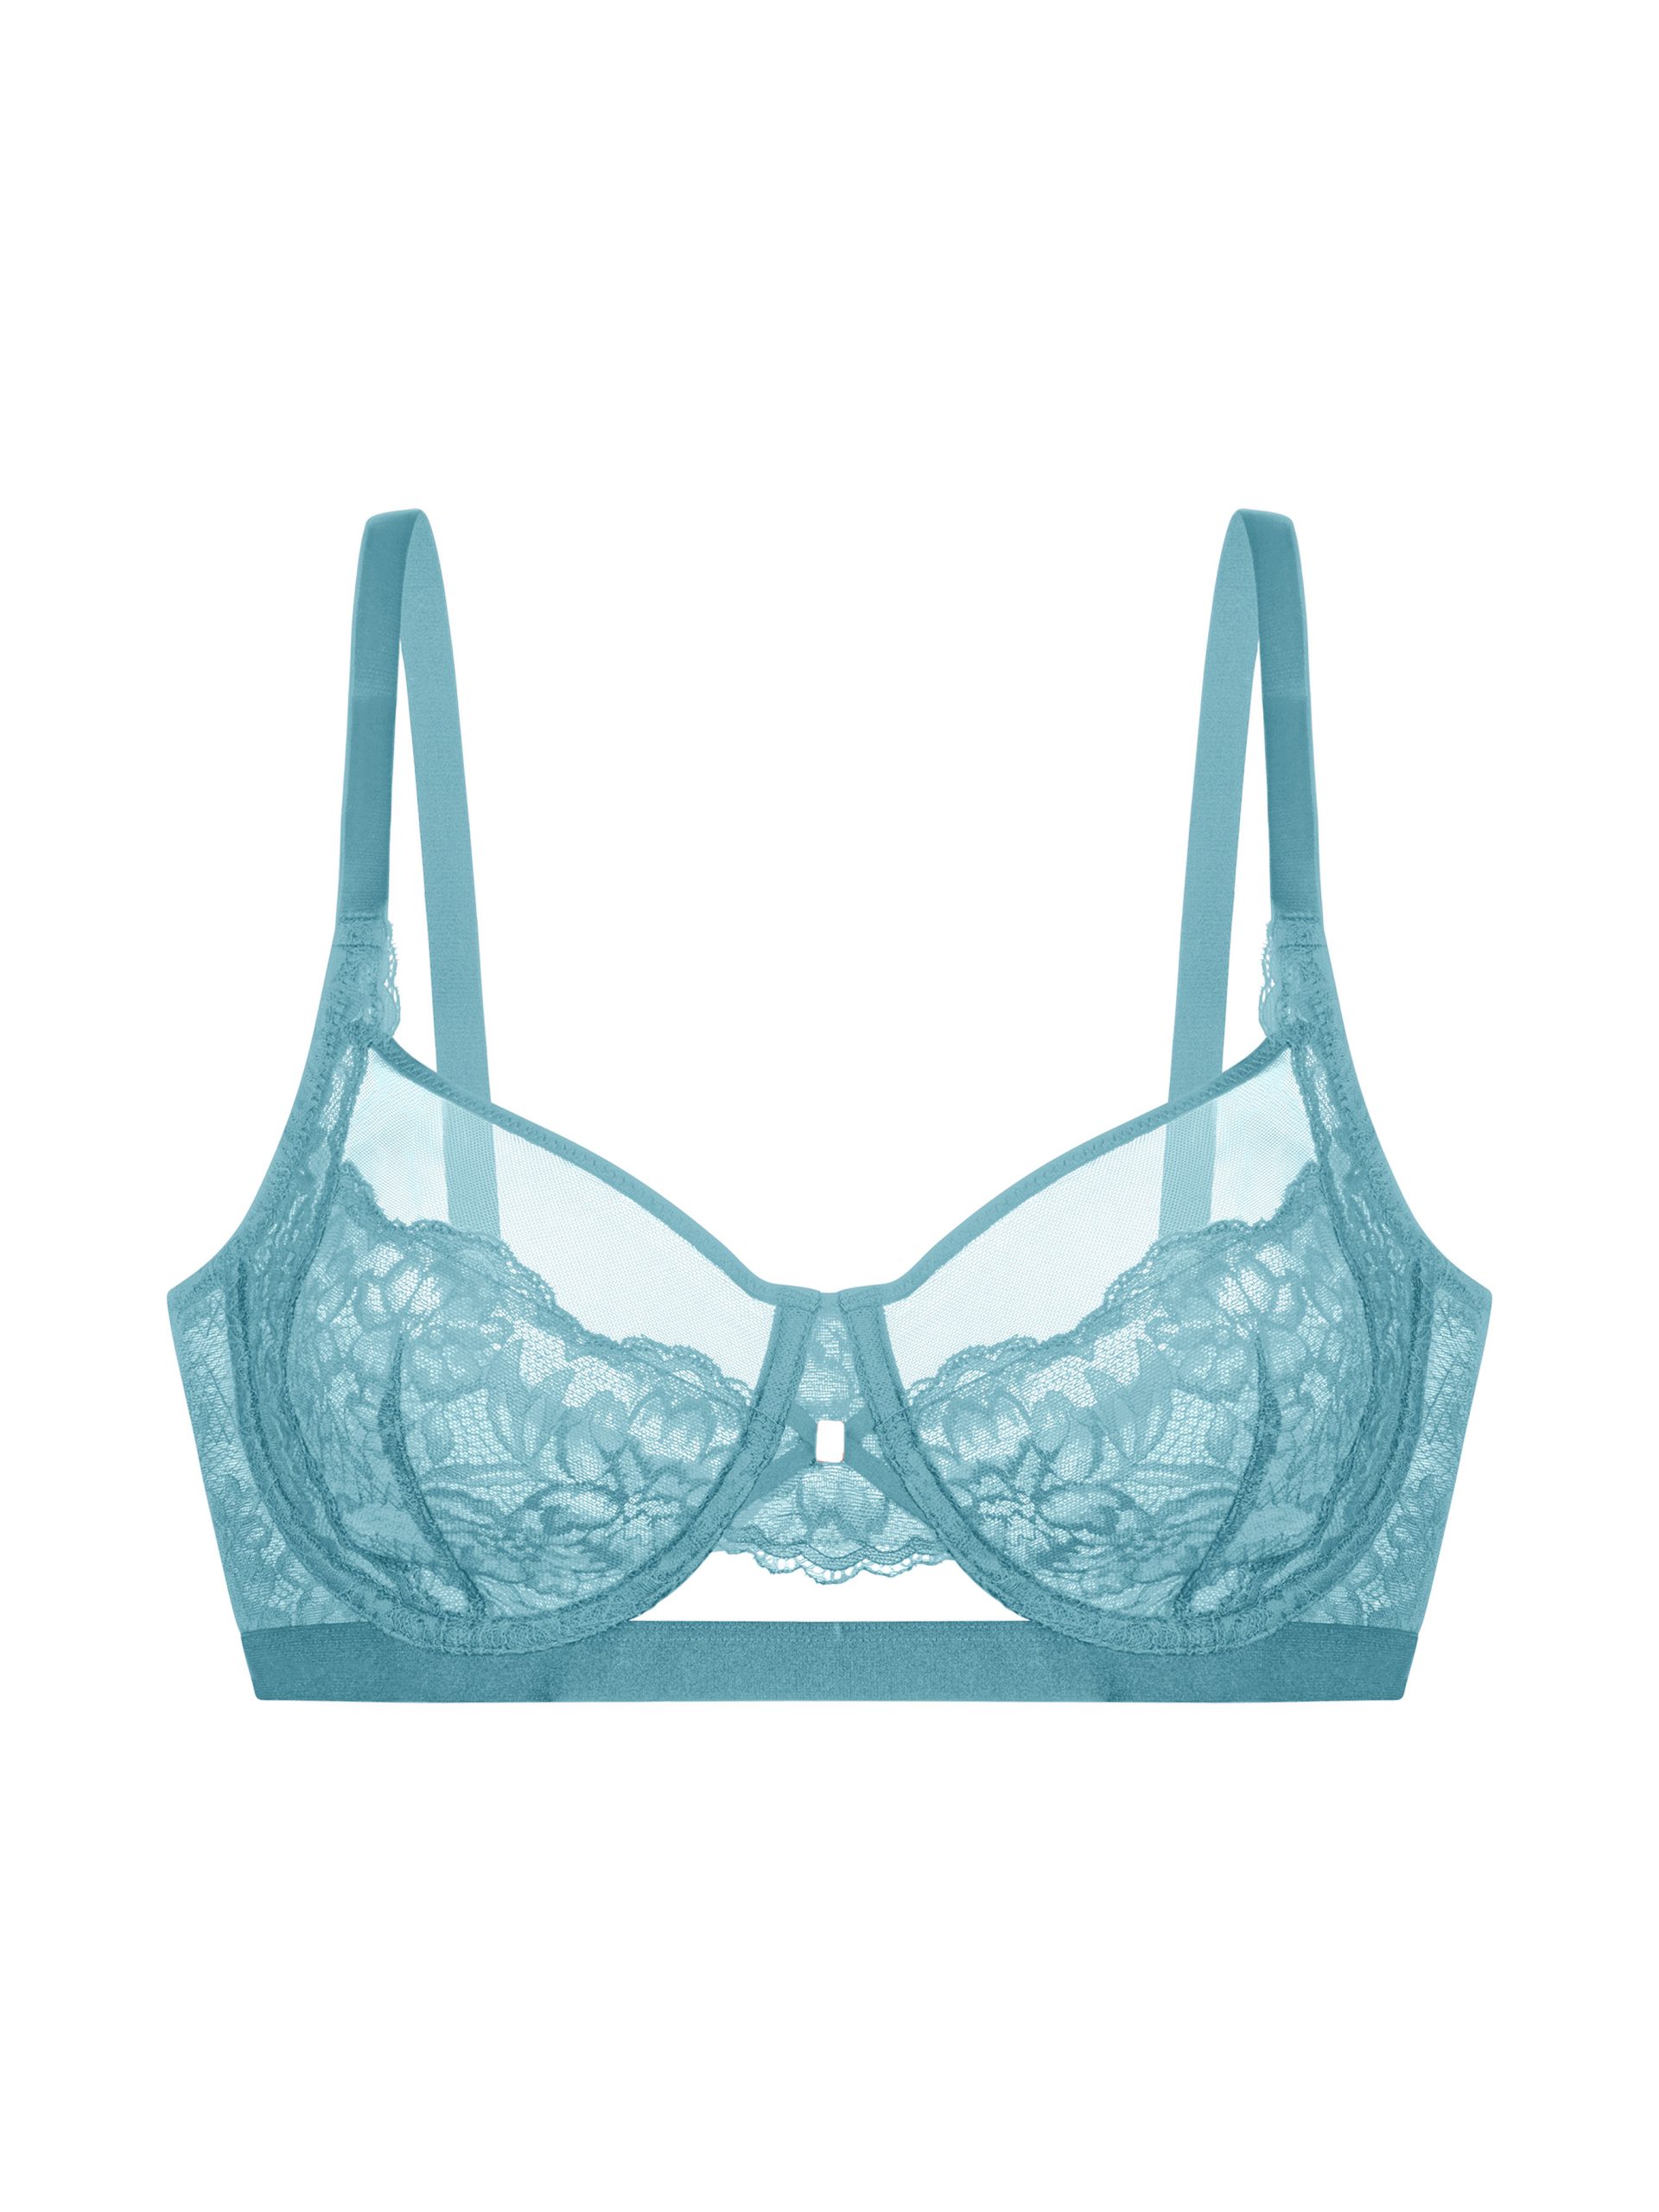 Lyra by Lux Lux Lyra Padded Bra 523 Women Push-up Heavily Padded Bra - Buy  Lyra by Lux Lux Lyra Padded Bra 523 Women Push-up Heavily Padded Bra Online  at Best Prices